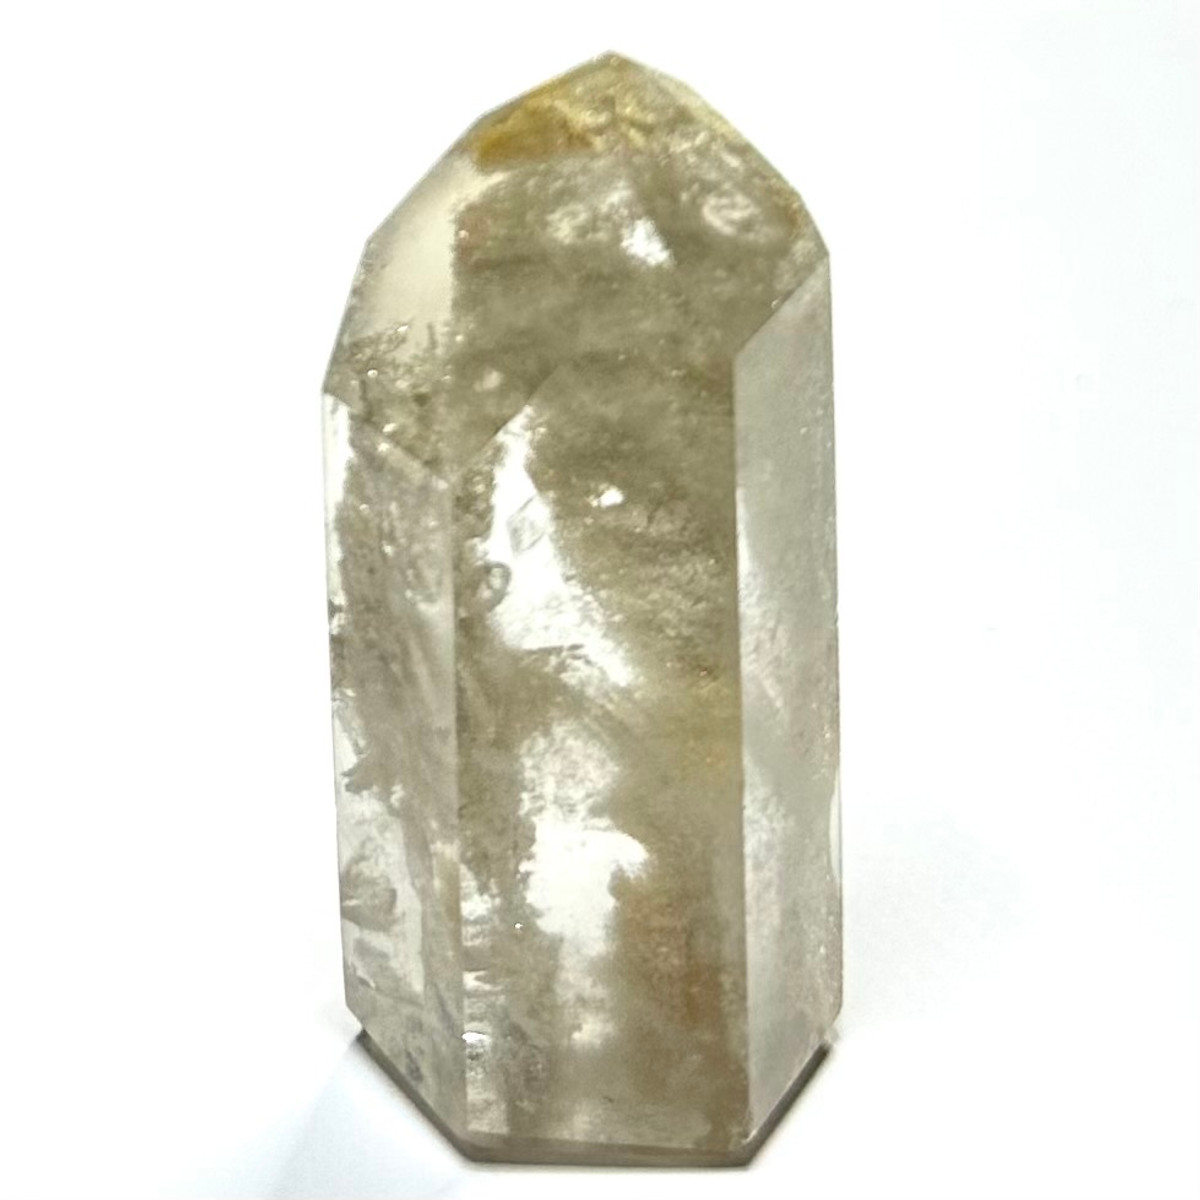 One of a Kind Garden Quartz with Rainbow Inclusions Mini Stone Tower-2 1/4 x 1"